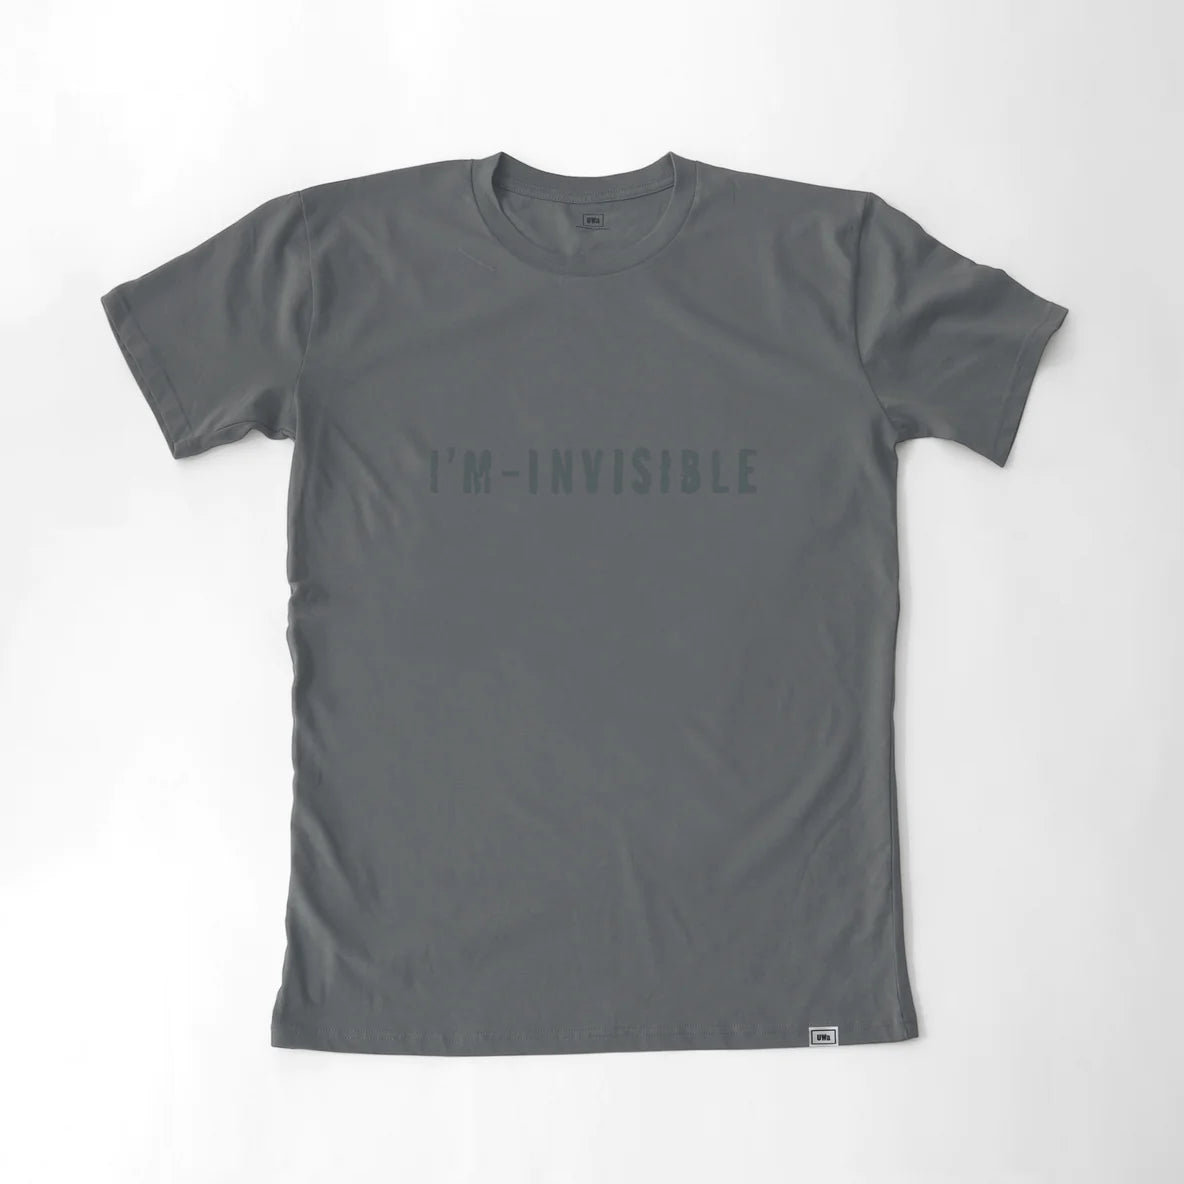 Underworld - *Cowgirl Limited Drop* I'm Invisible Grey Tee Shirt